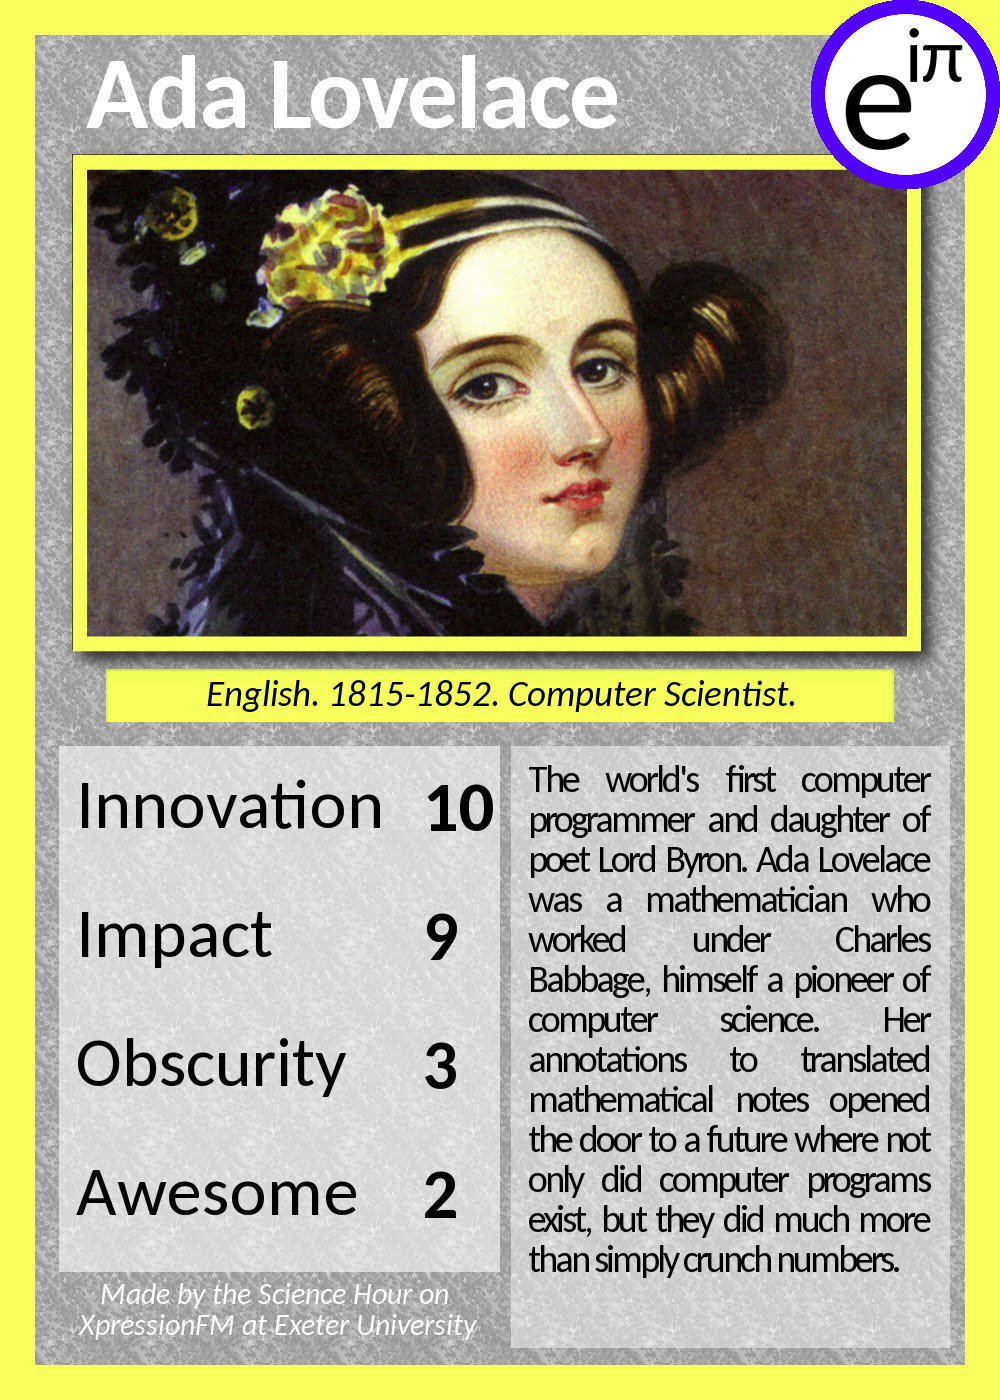 Happy #AdaLovelaceDay! Here she is in the Top Female Scientists deck made by @StellarPlanet and I; she was the very first card!
#ALD17 https://t.co/6GxSyk58v8